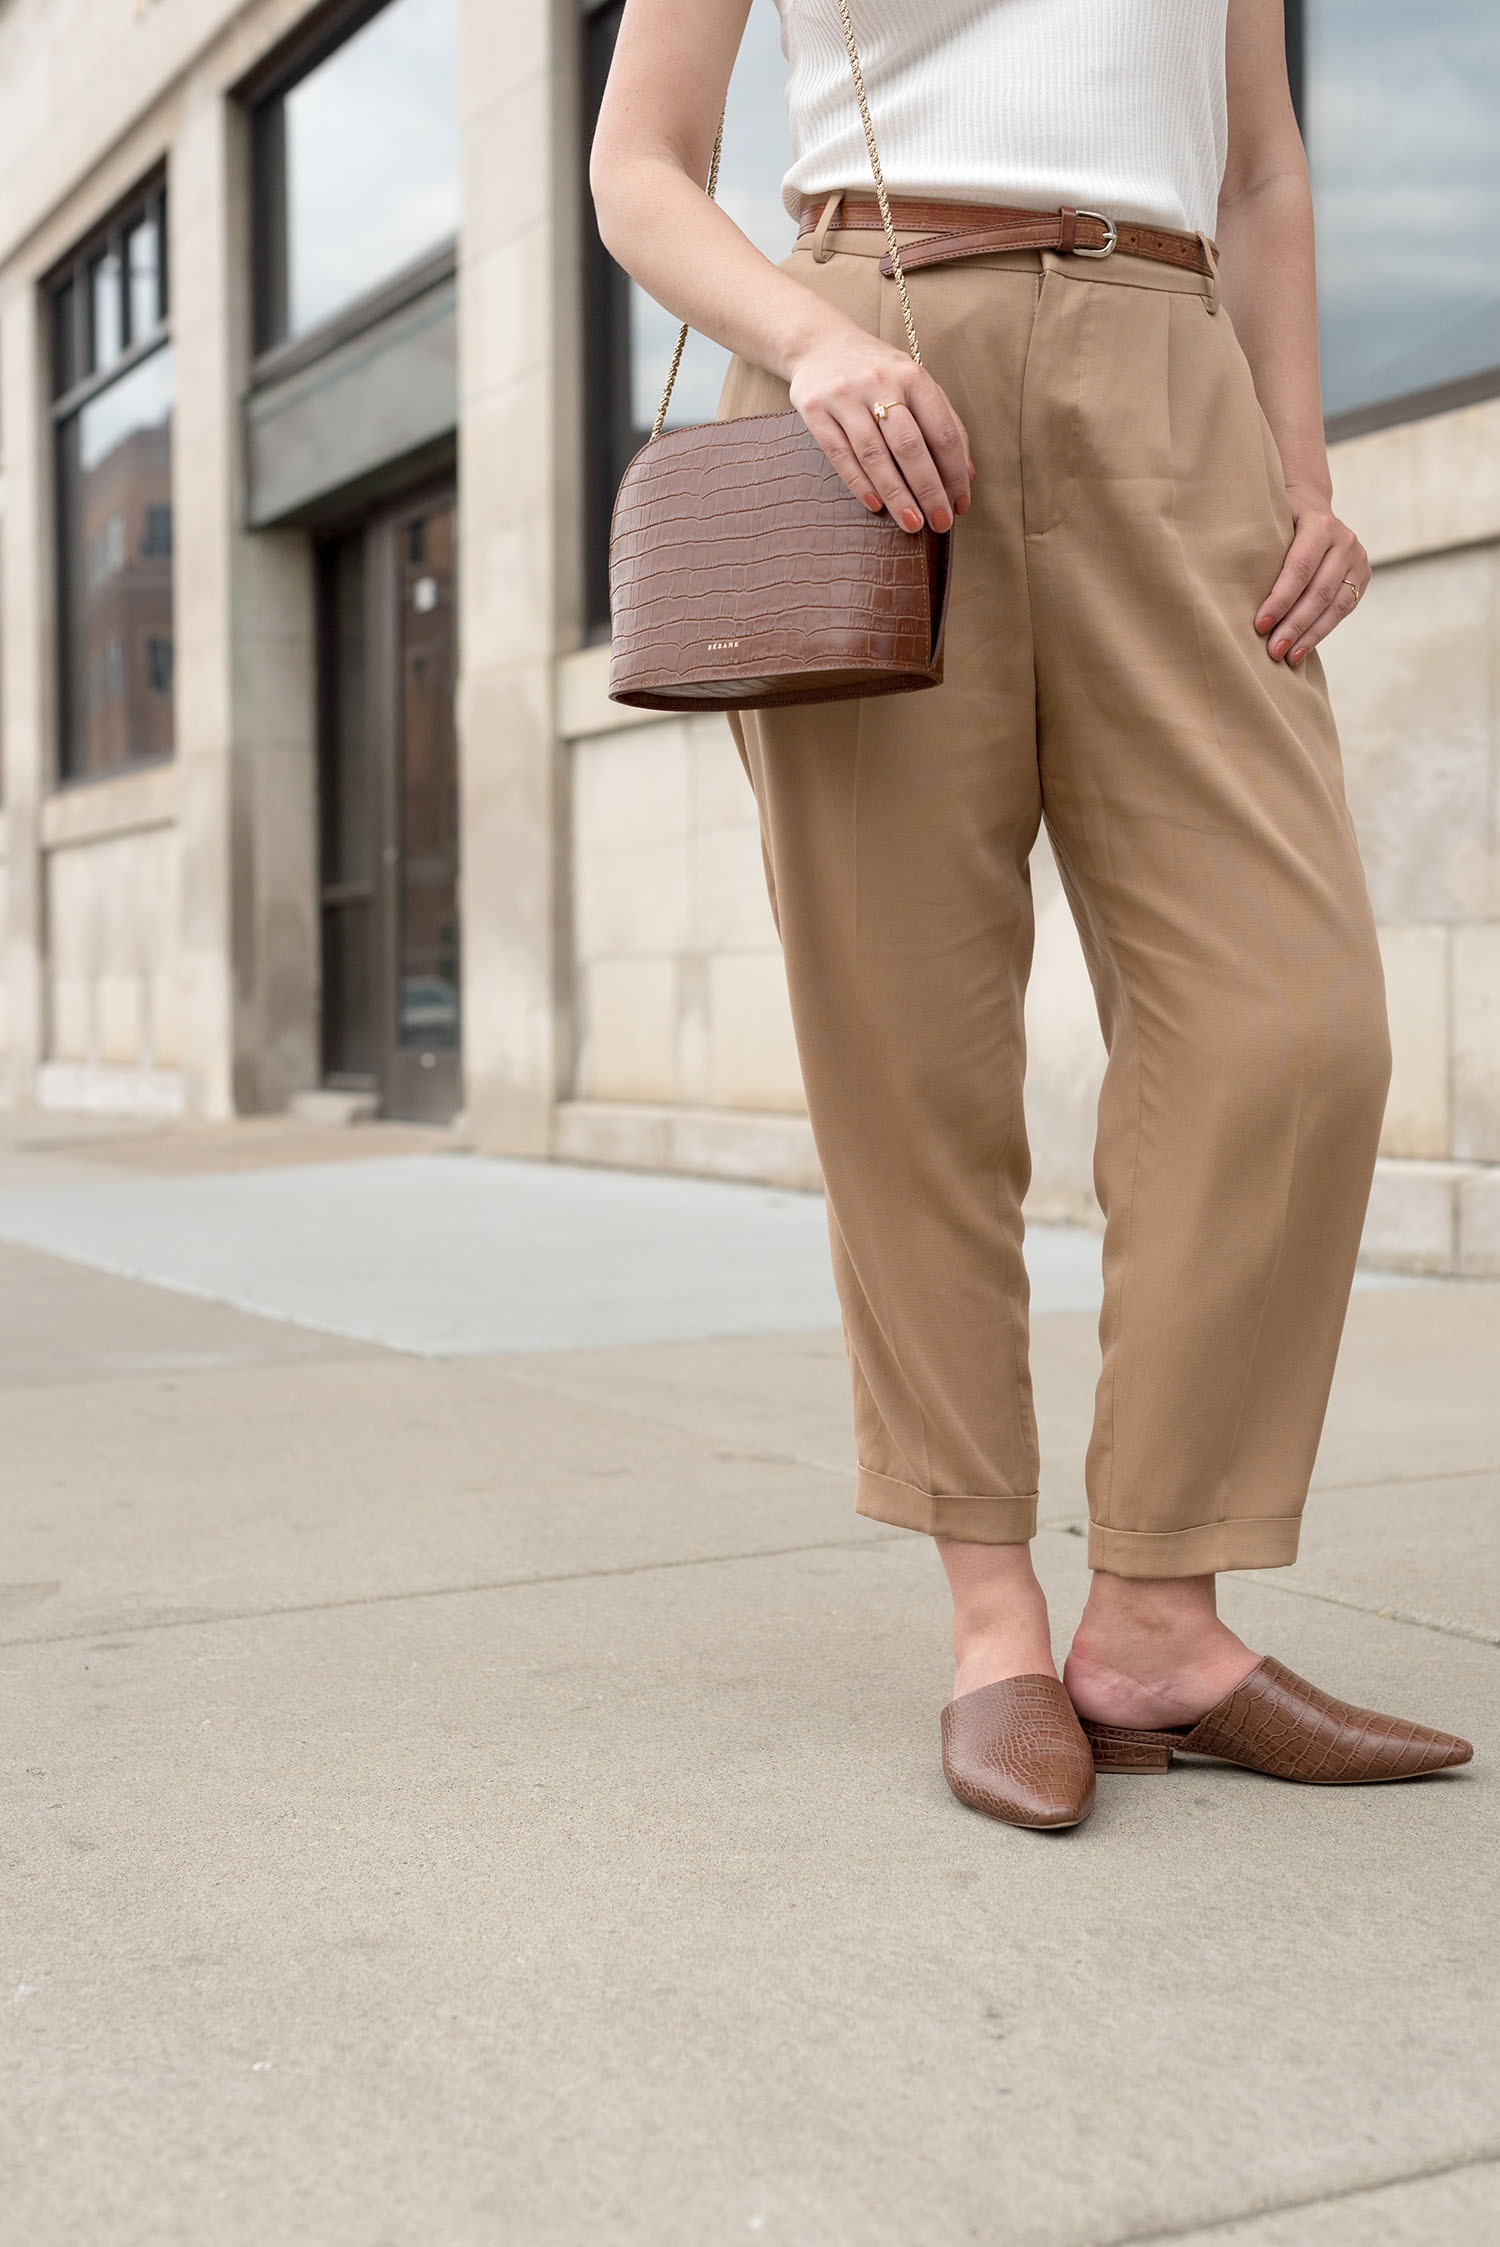 Outfit details on top Winnipeg fashion blogger Cee Fardoe of Coco & Vera, including Zara trousers and Oak + Fort mules